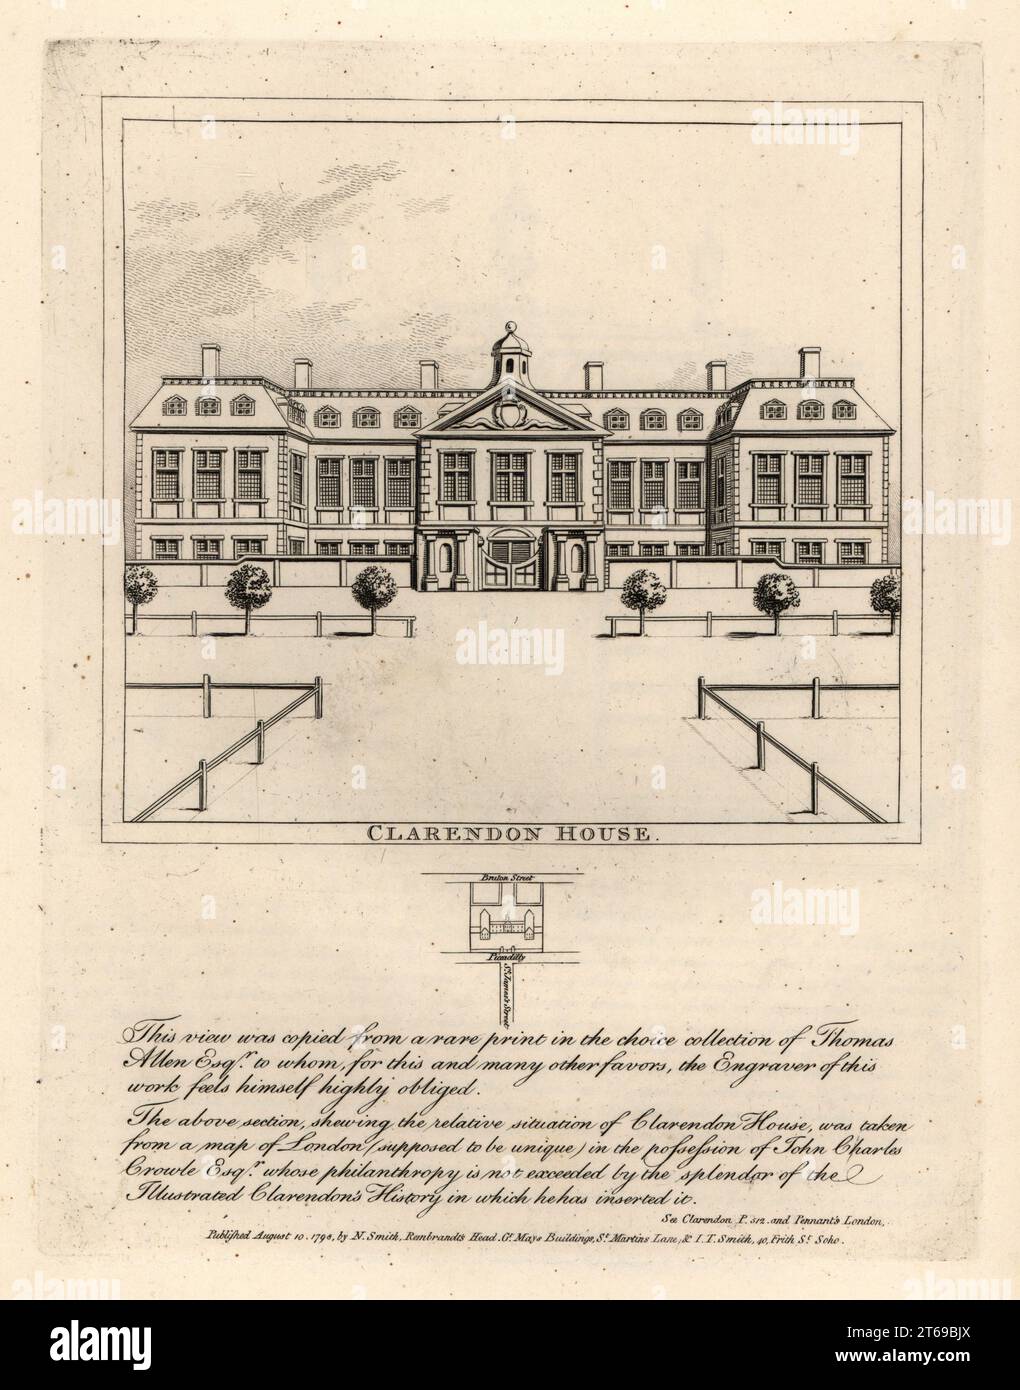 View of Clarendon House from St. James Street,, from a rare print in the collection of Thmoas Allen. Classical mansion built by Roger Platt for Edward Hyde, 1st Earl of Clarendon, in 1664. Demolished in 1683. Copperplate engraving by John Thomas Smith after original drawings by members of the Society of Antiquaries from his J.T. Smiths Antiquities of London and its Environs, J. Sewell, R. Folder, J. Simco, London, 1798. Stock Photo